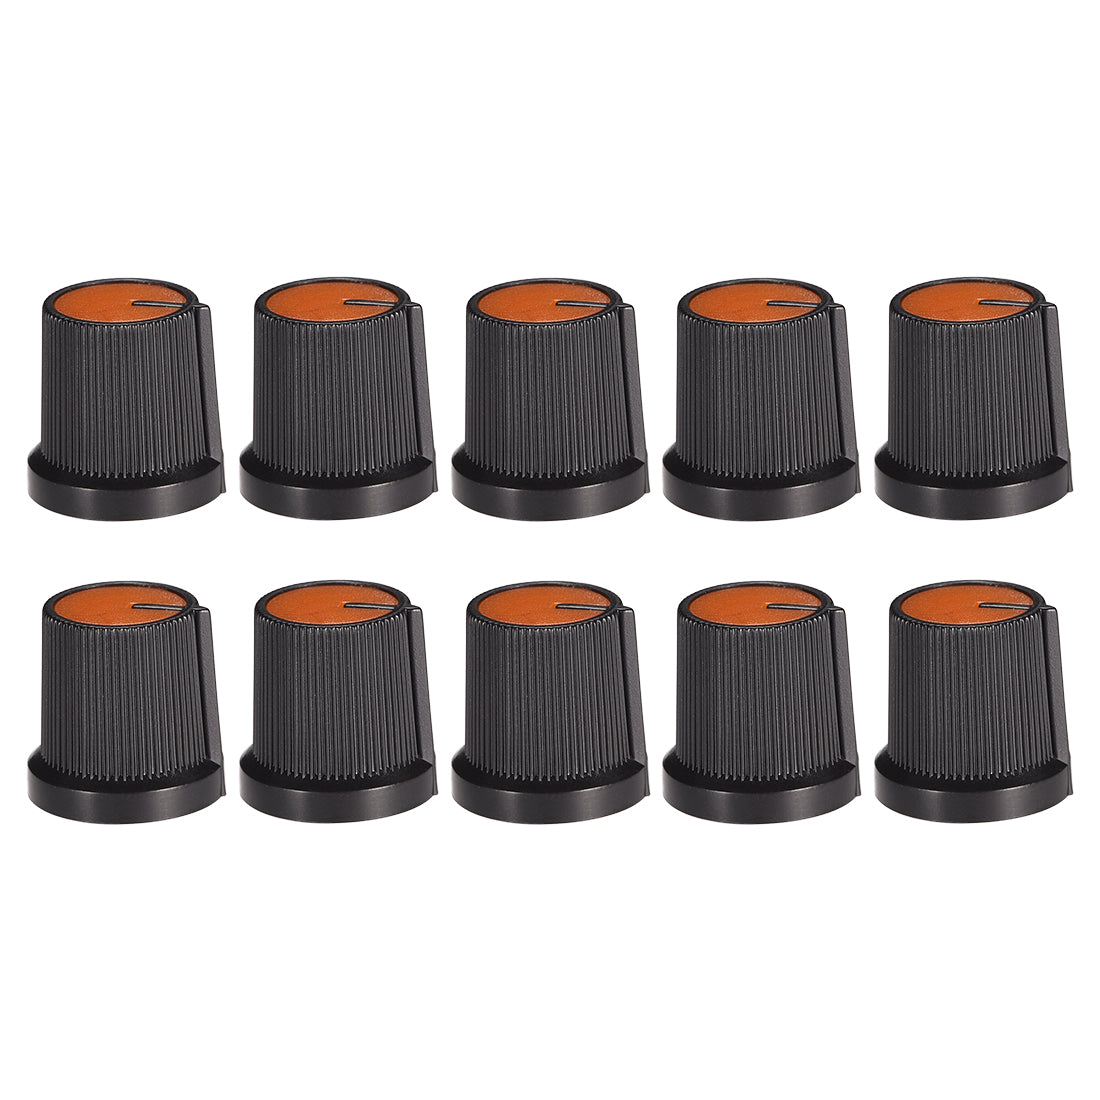 Uxcell Uxcell 10Pcs 6mm Shaft Hole Knob for Speaker Effect Pedal Amplifier Potentiometer Knob Black Yellow